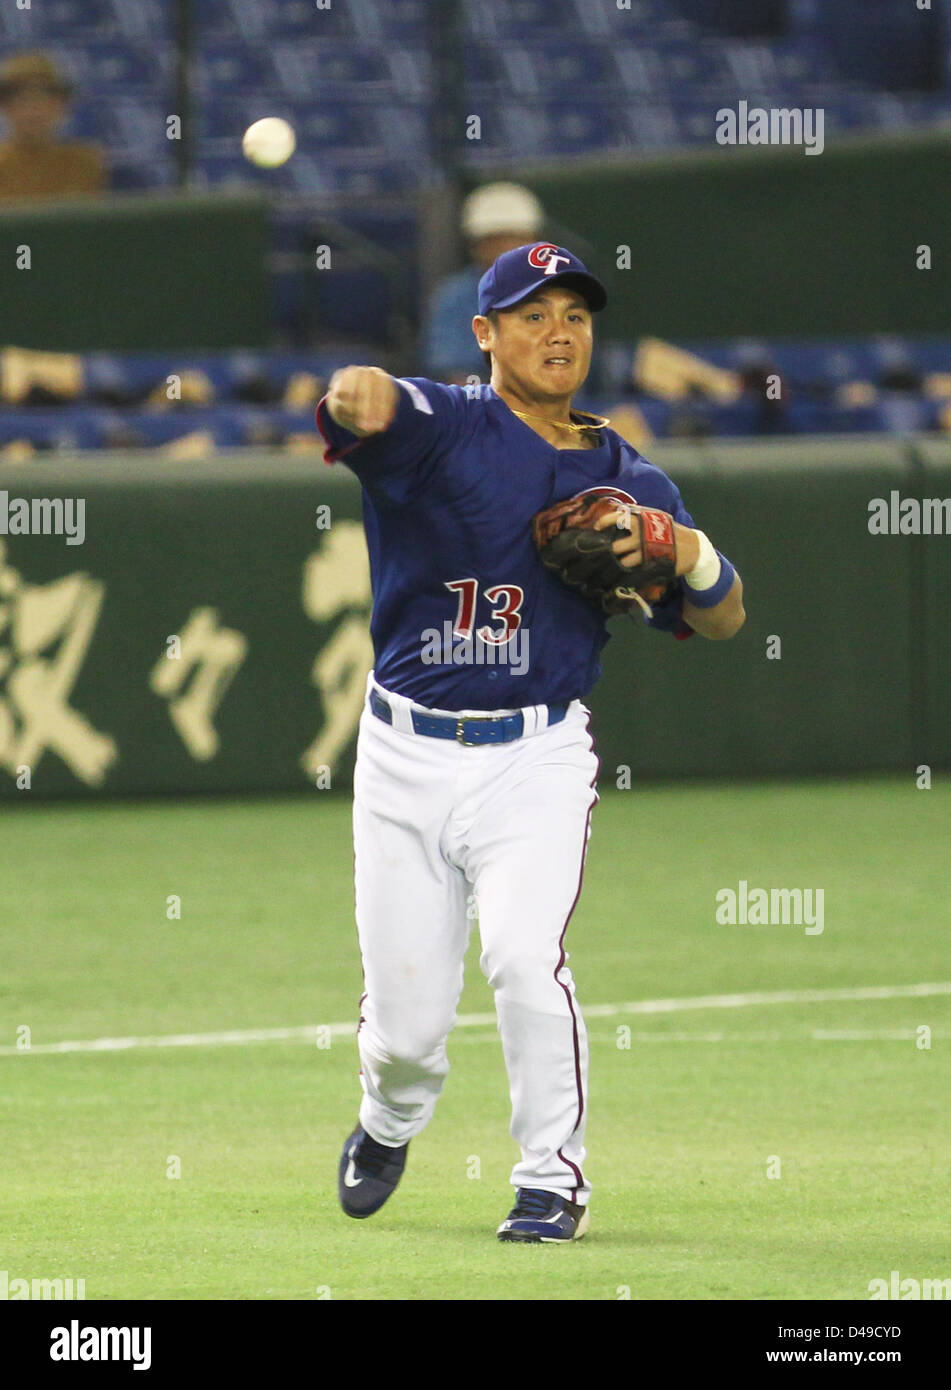 March 9, 2013 - Tokyo, Japan - Yung-Chi Chen (Chinese Taipei) throws the ball during the Pool 1 Second Round game between Chinese Taipei and Cuba of the World Baseball Classic (WBC) at Tokyo Dome on March 9, 2013 in Tokyo, Japan. (Credit Image: © Koichi Kamoshida/Jana Press/ZUMAPRESS.com) Stock Photo